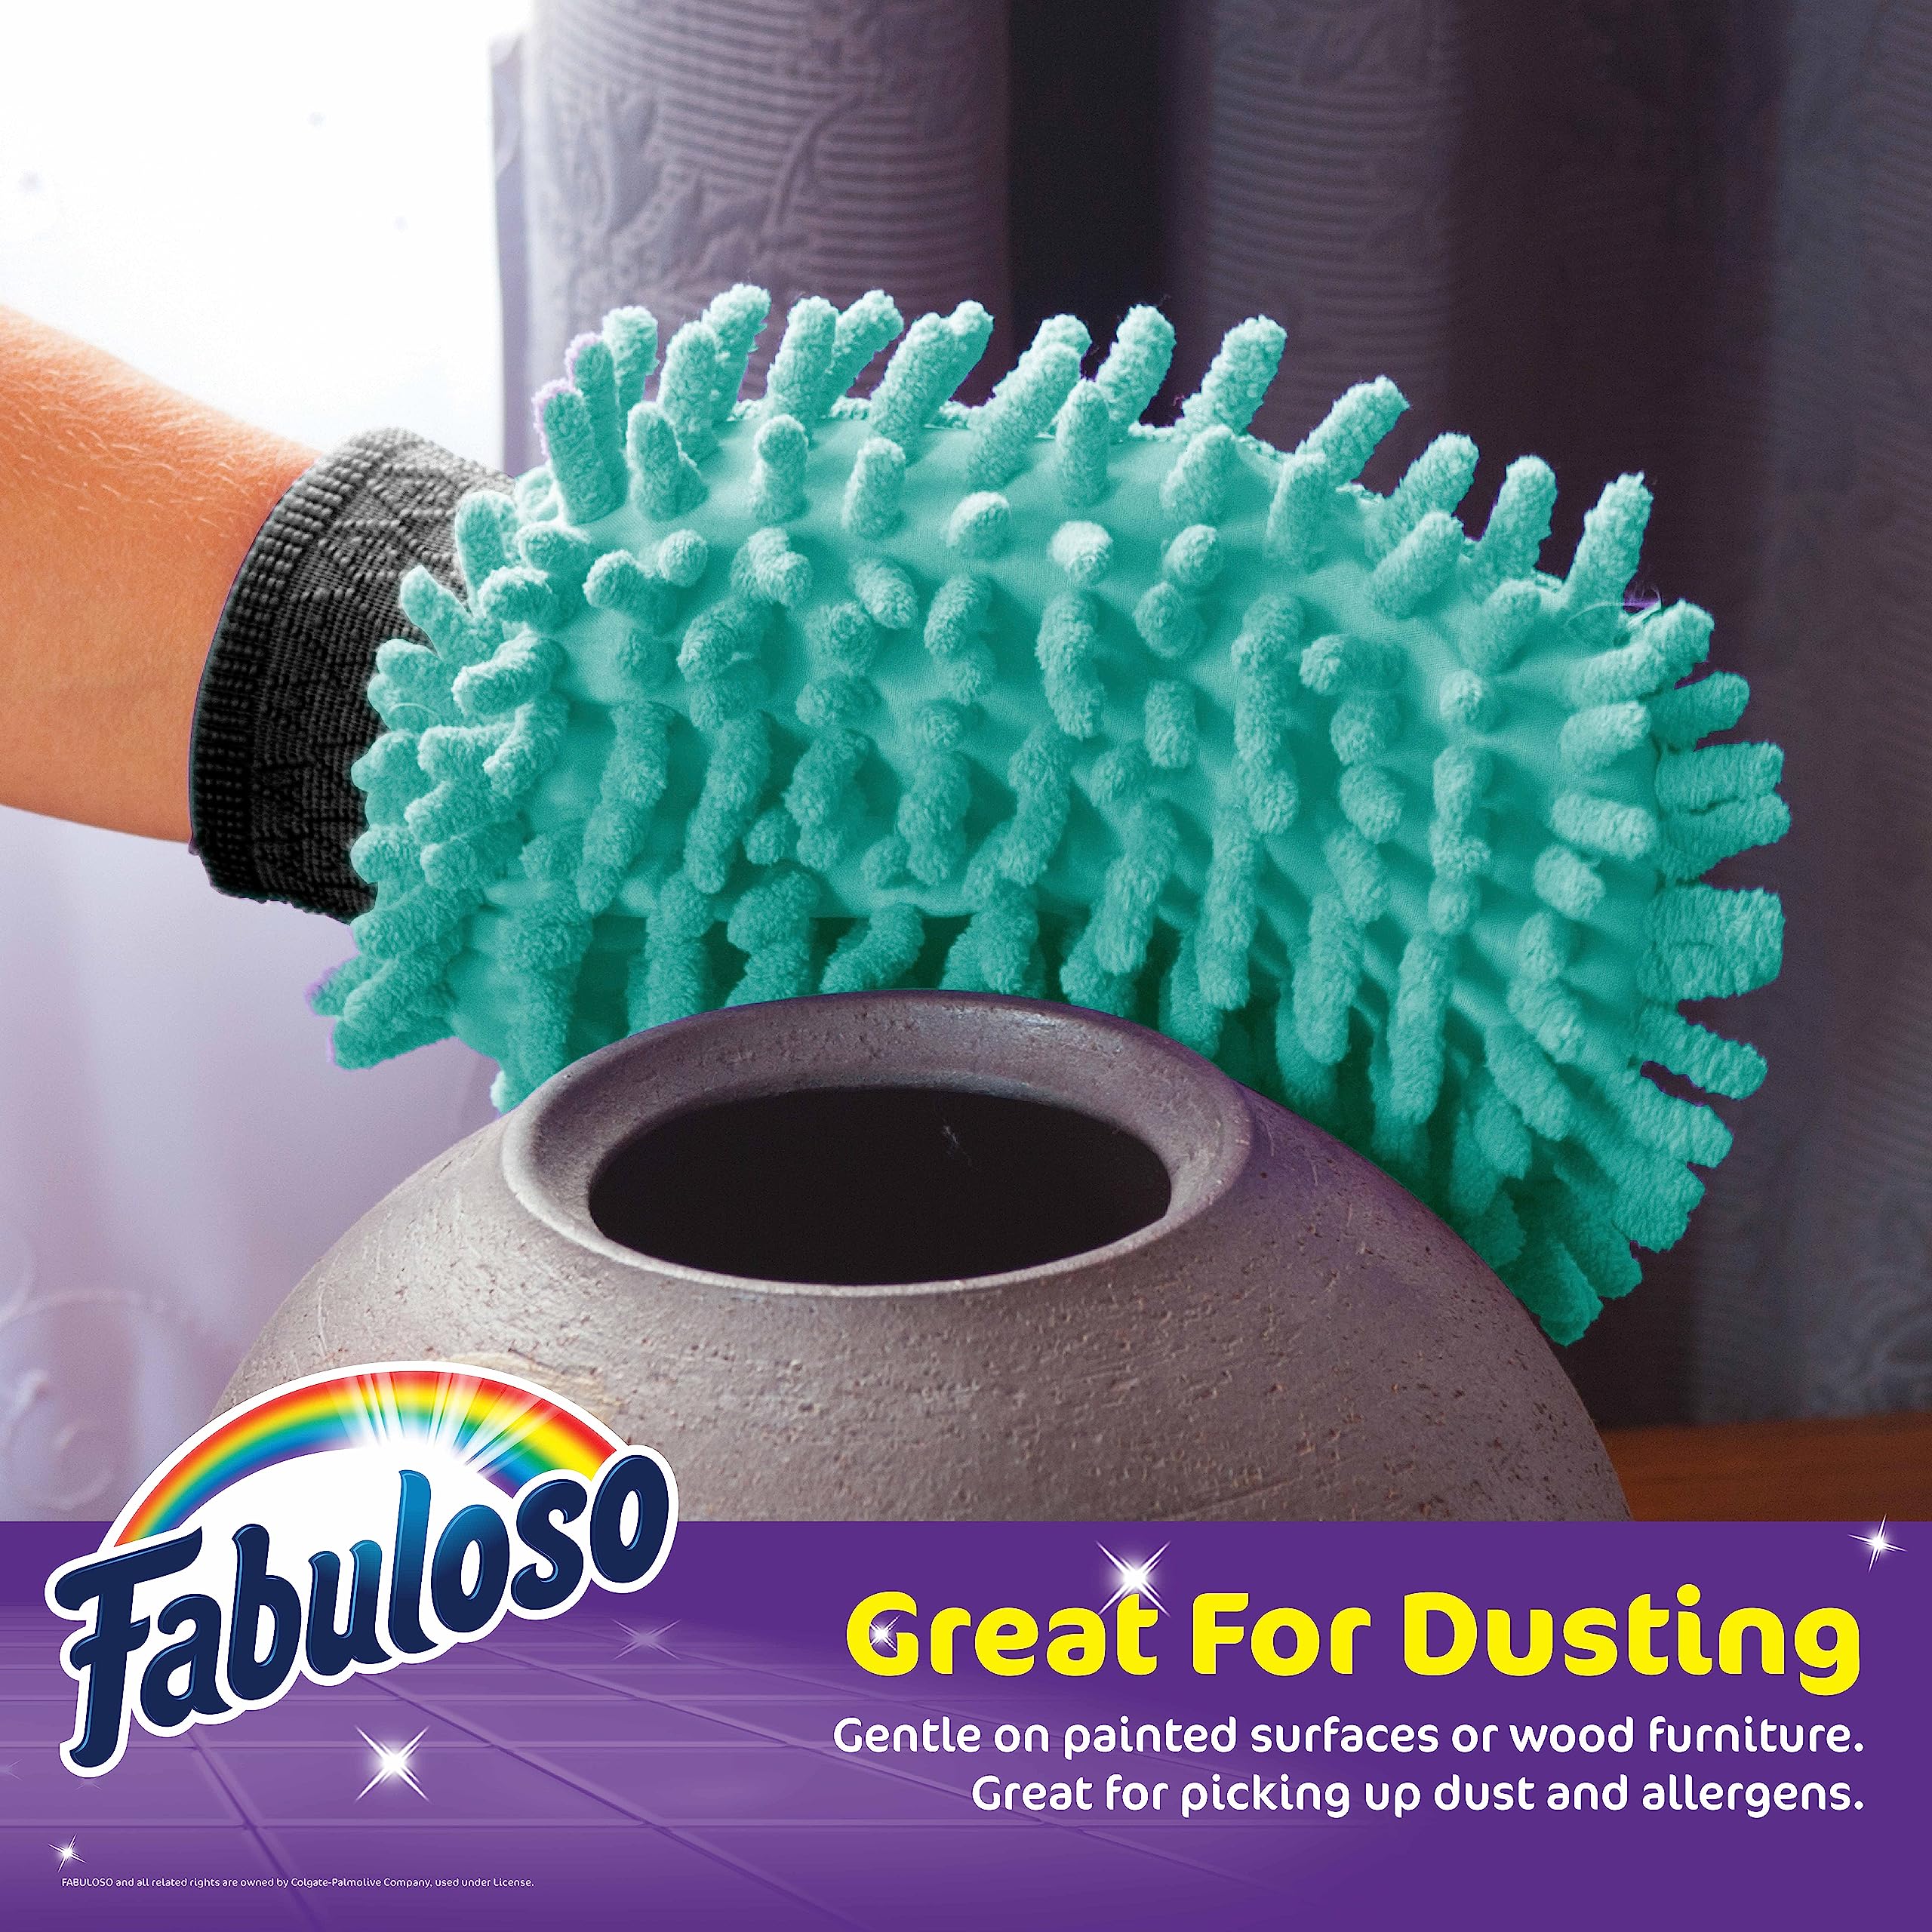 Fabuloso Microfiber Cleaning Mitt, Teal, One Size Fits All | Lint-Free, Scratch-Free Cleaning Glove for Surfaces and Furniture | Microfiber Dustless Hand Cloth for Bold and Bright Cleaning Experience